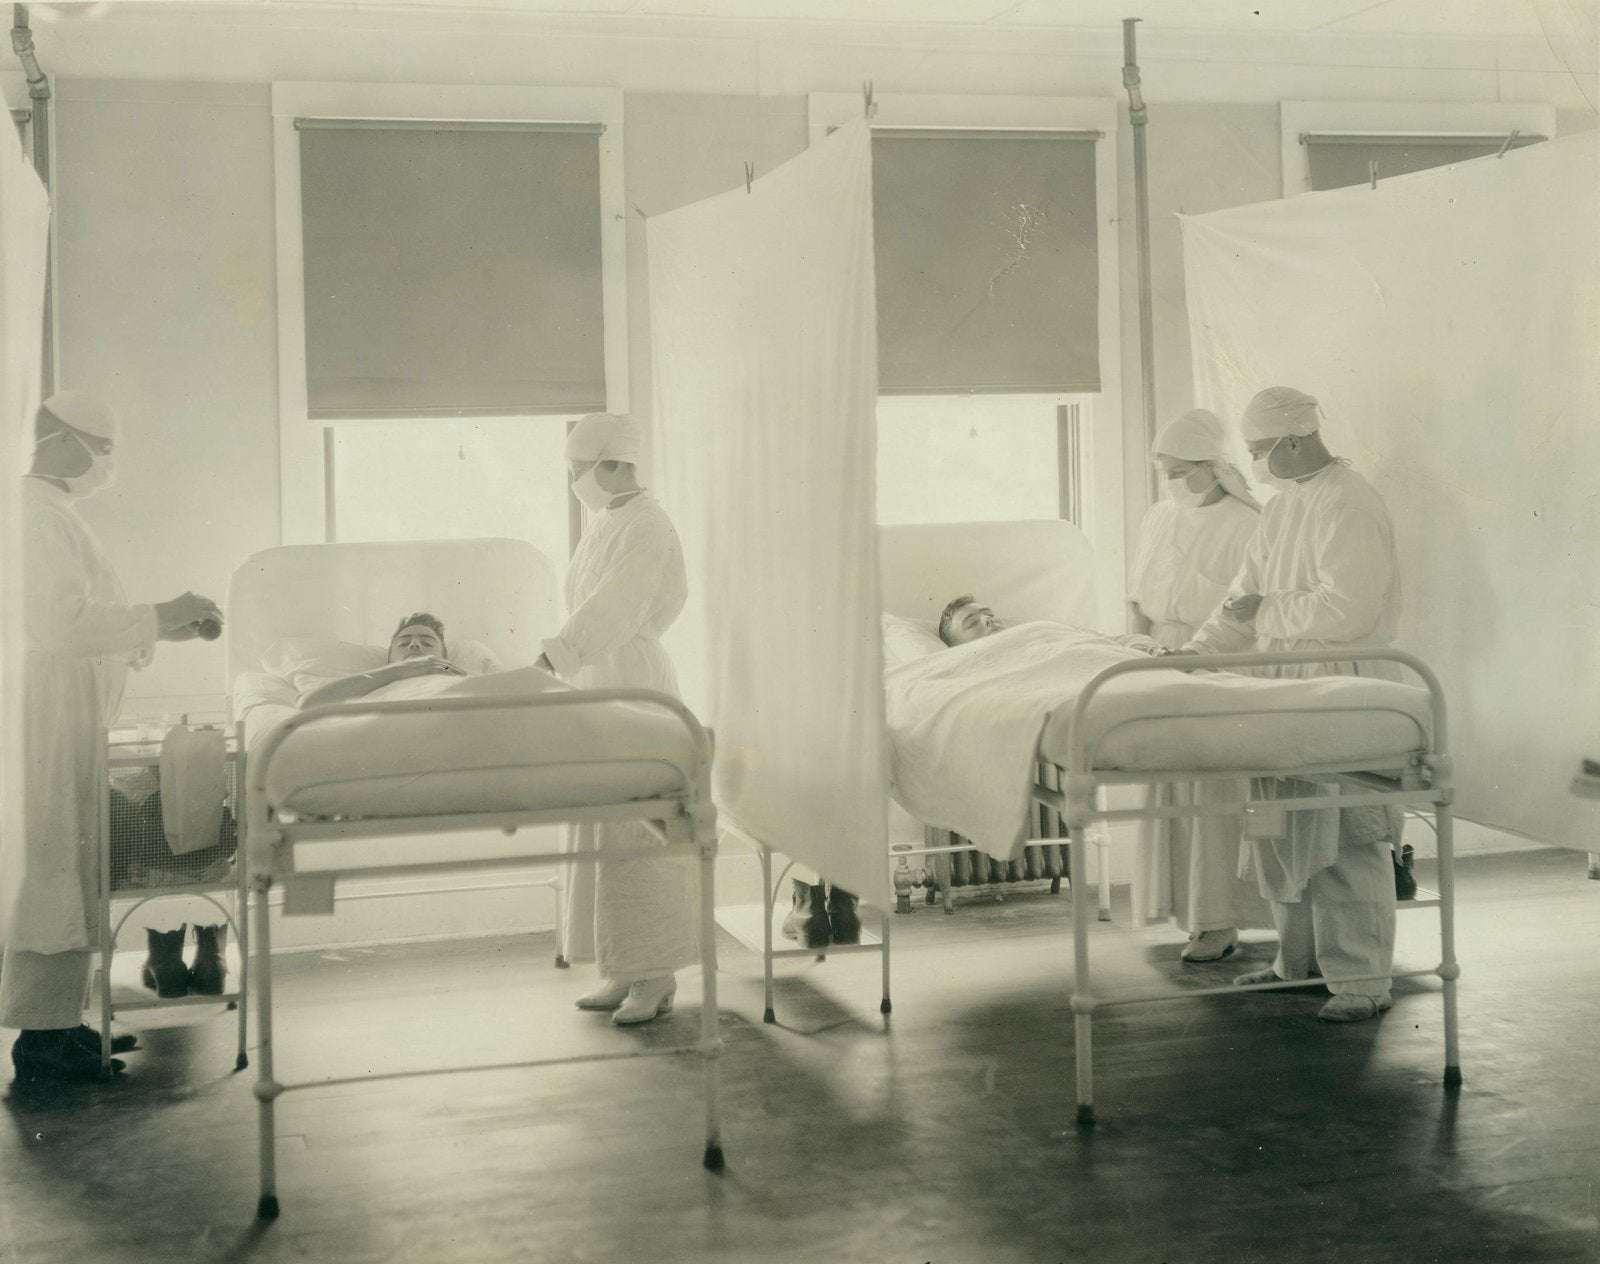 image for Covid-19 Surpasses 1918 Flu to Become Deadliest Pandemic in American History